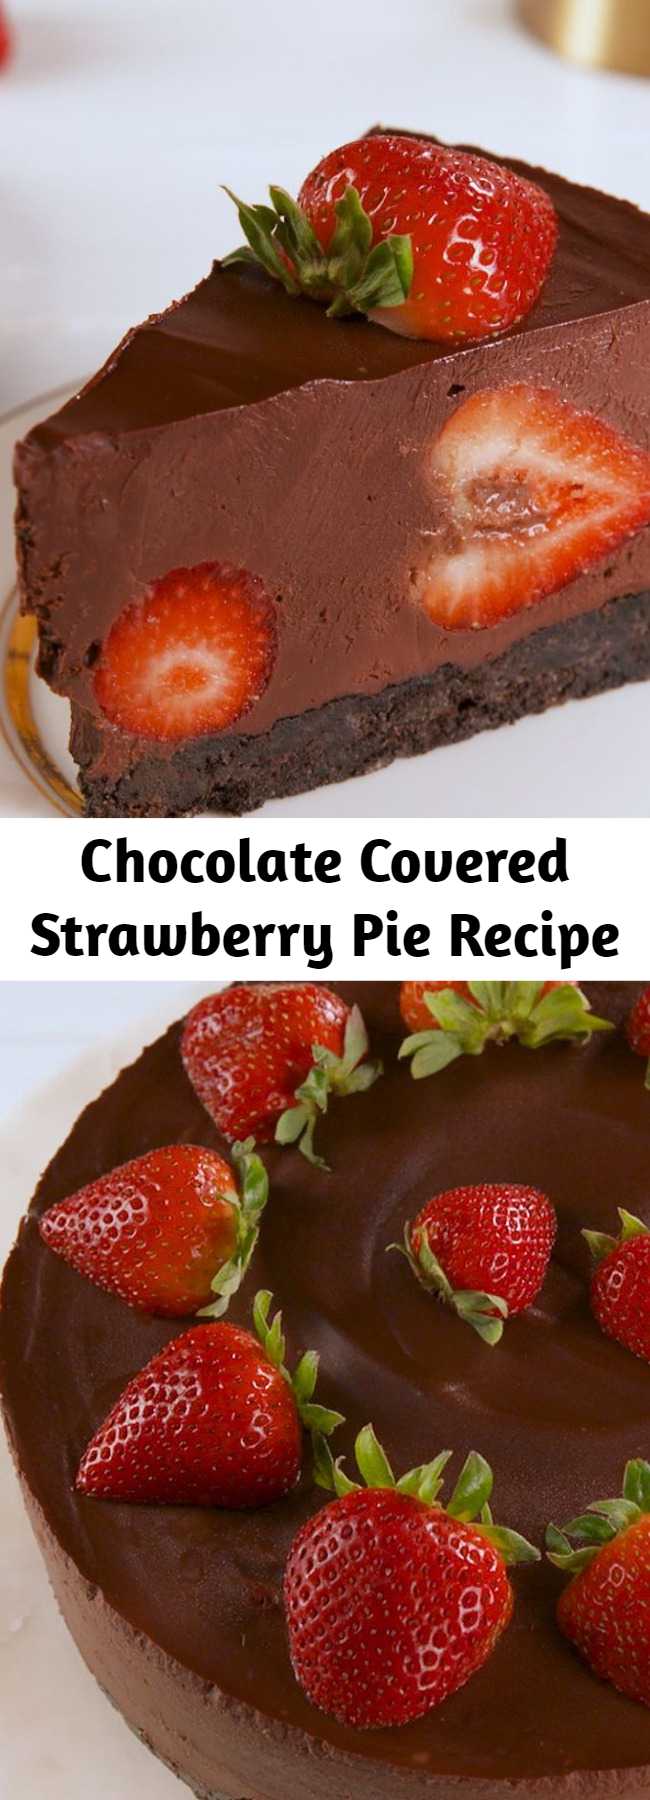 Chocolate Covered Strawberry Pie Recipe - Super impressive looking and surprisingly easy to make, this is the perfect summertime dessert. No oven needed! #dessert #chocolate #pie #easyrecipe #recipe #strawberry #nobake #valentines